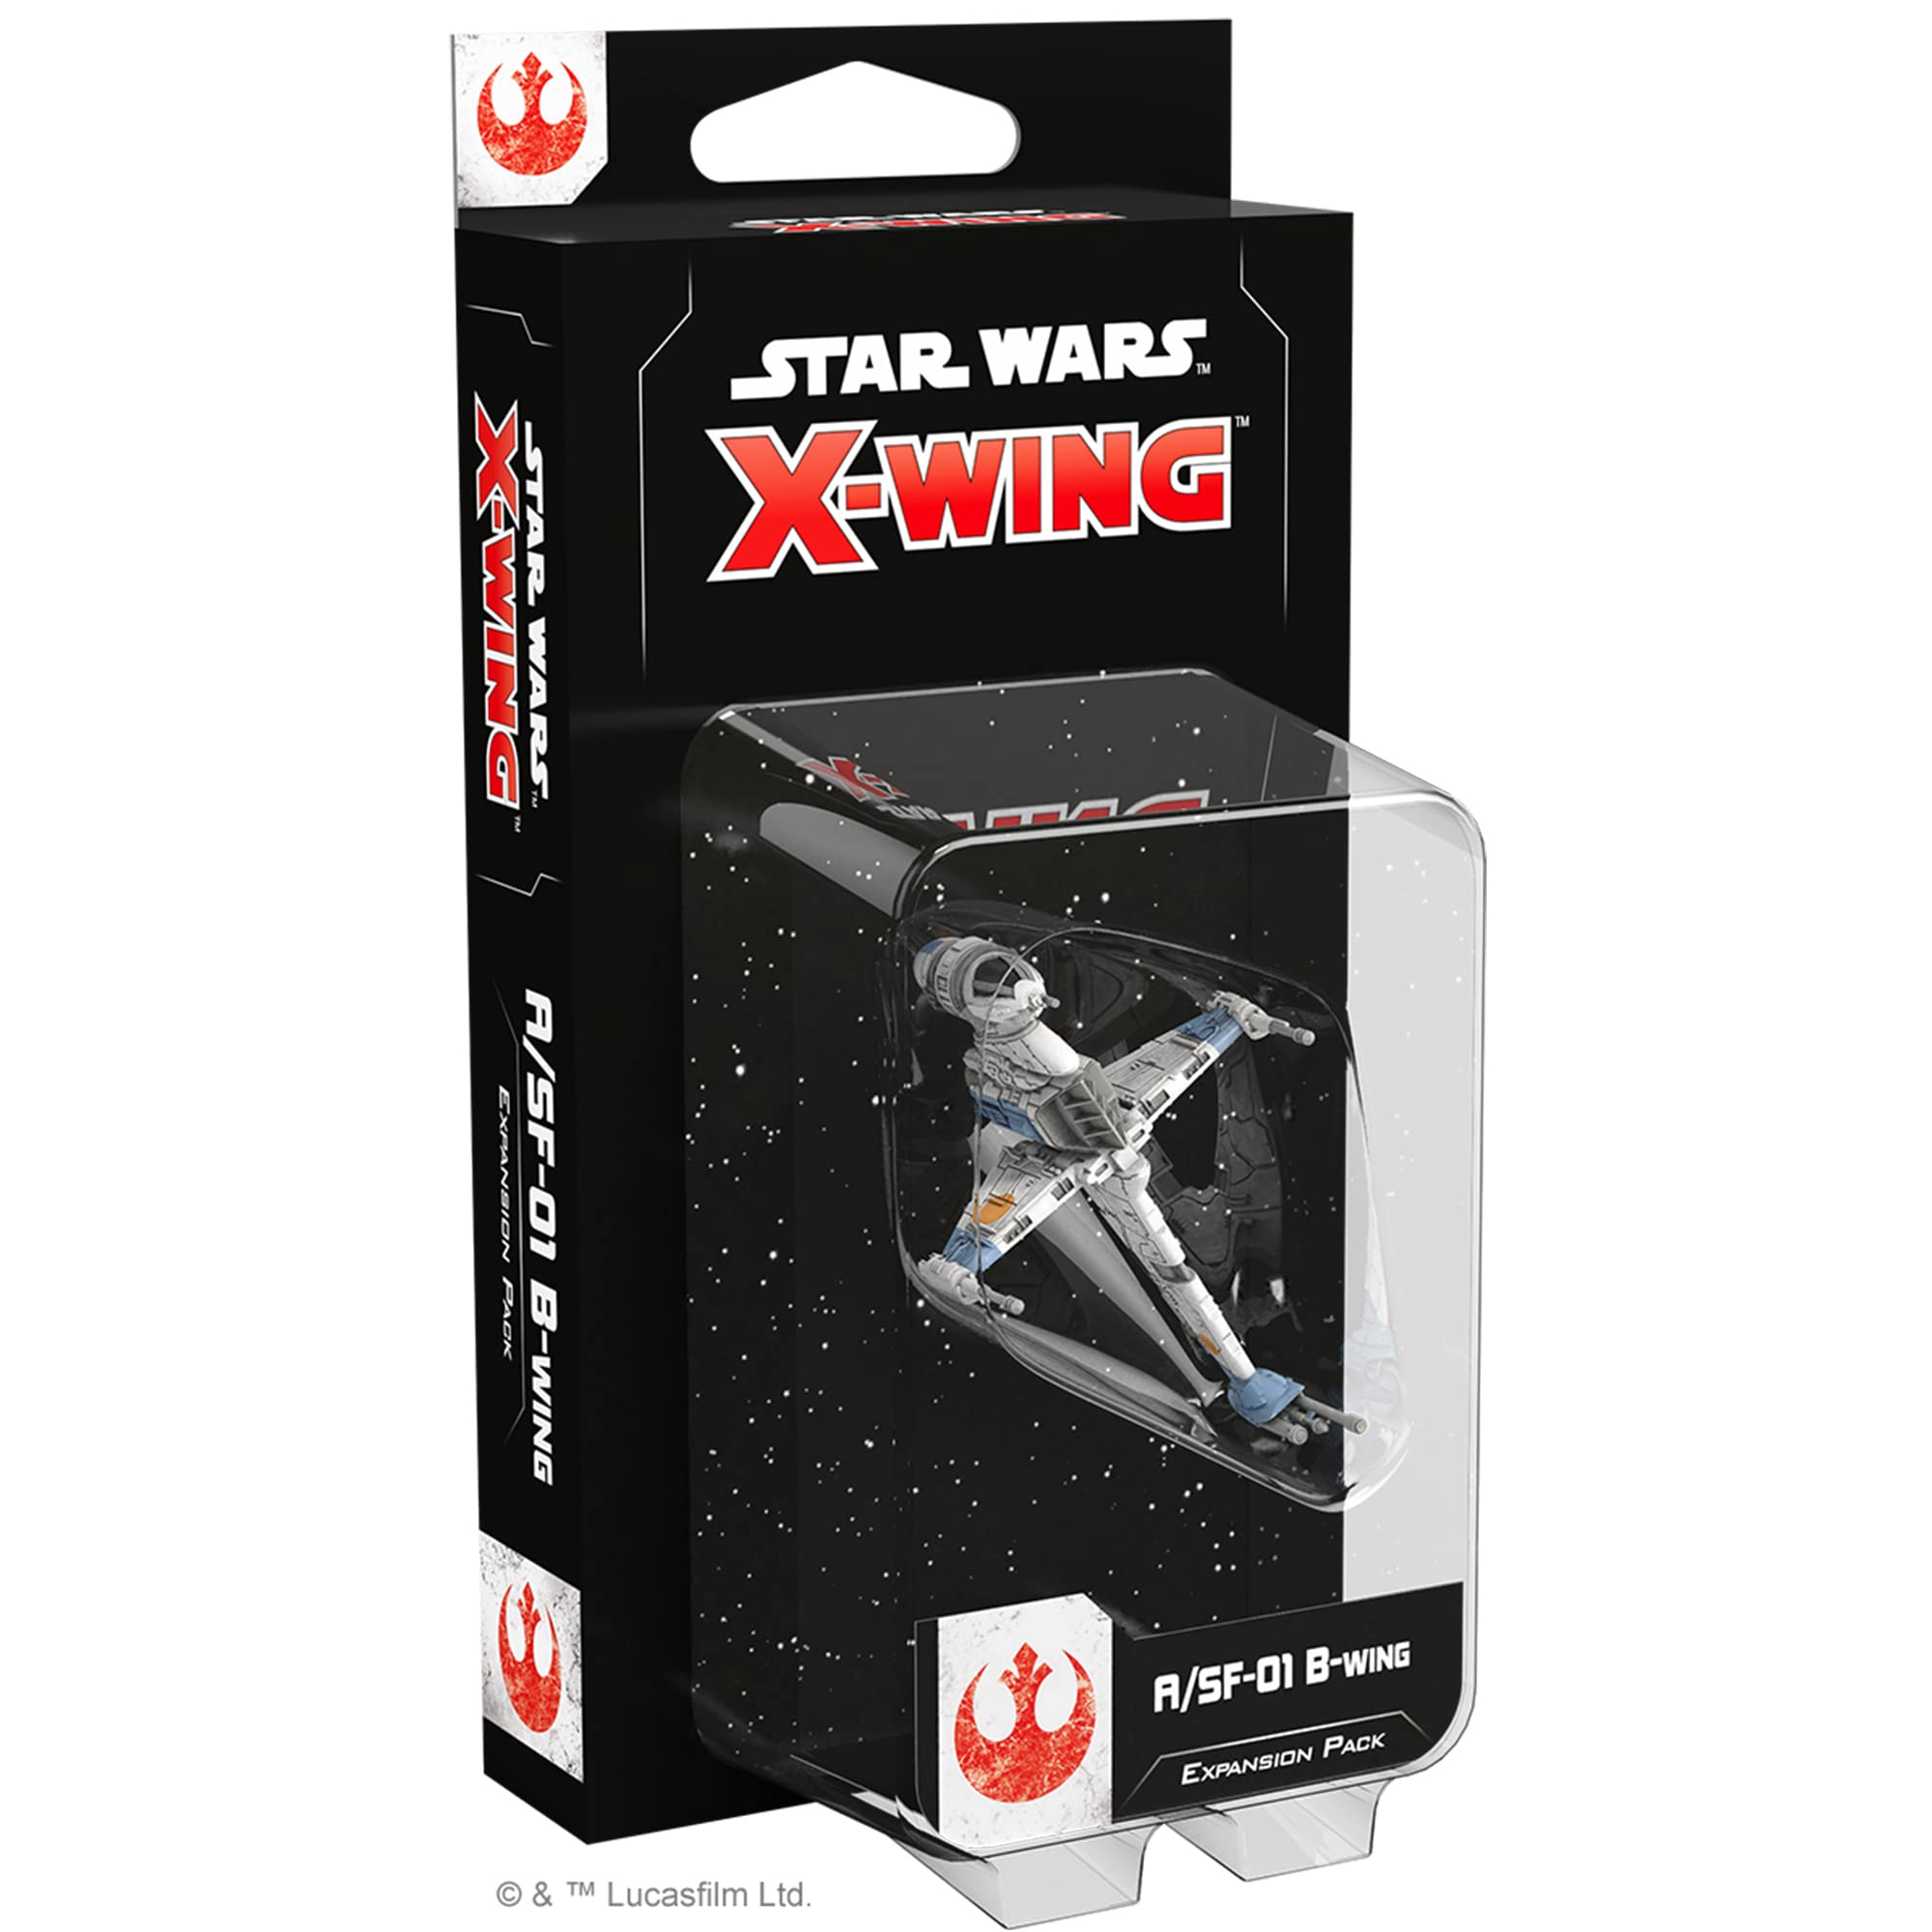 Star Wars X-Wing 2nd Edition Miniatures Game A/SF-01 B-Wing EXPANSION PACK | Strategy Game for Adults and Teens | Ages 14+ | 2 Players | Average Playtime 45 Minutes | Made by Atomic Mass Games